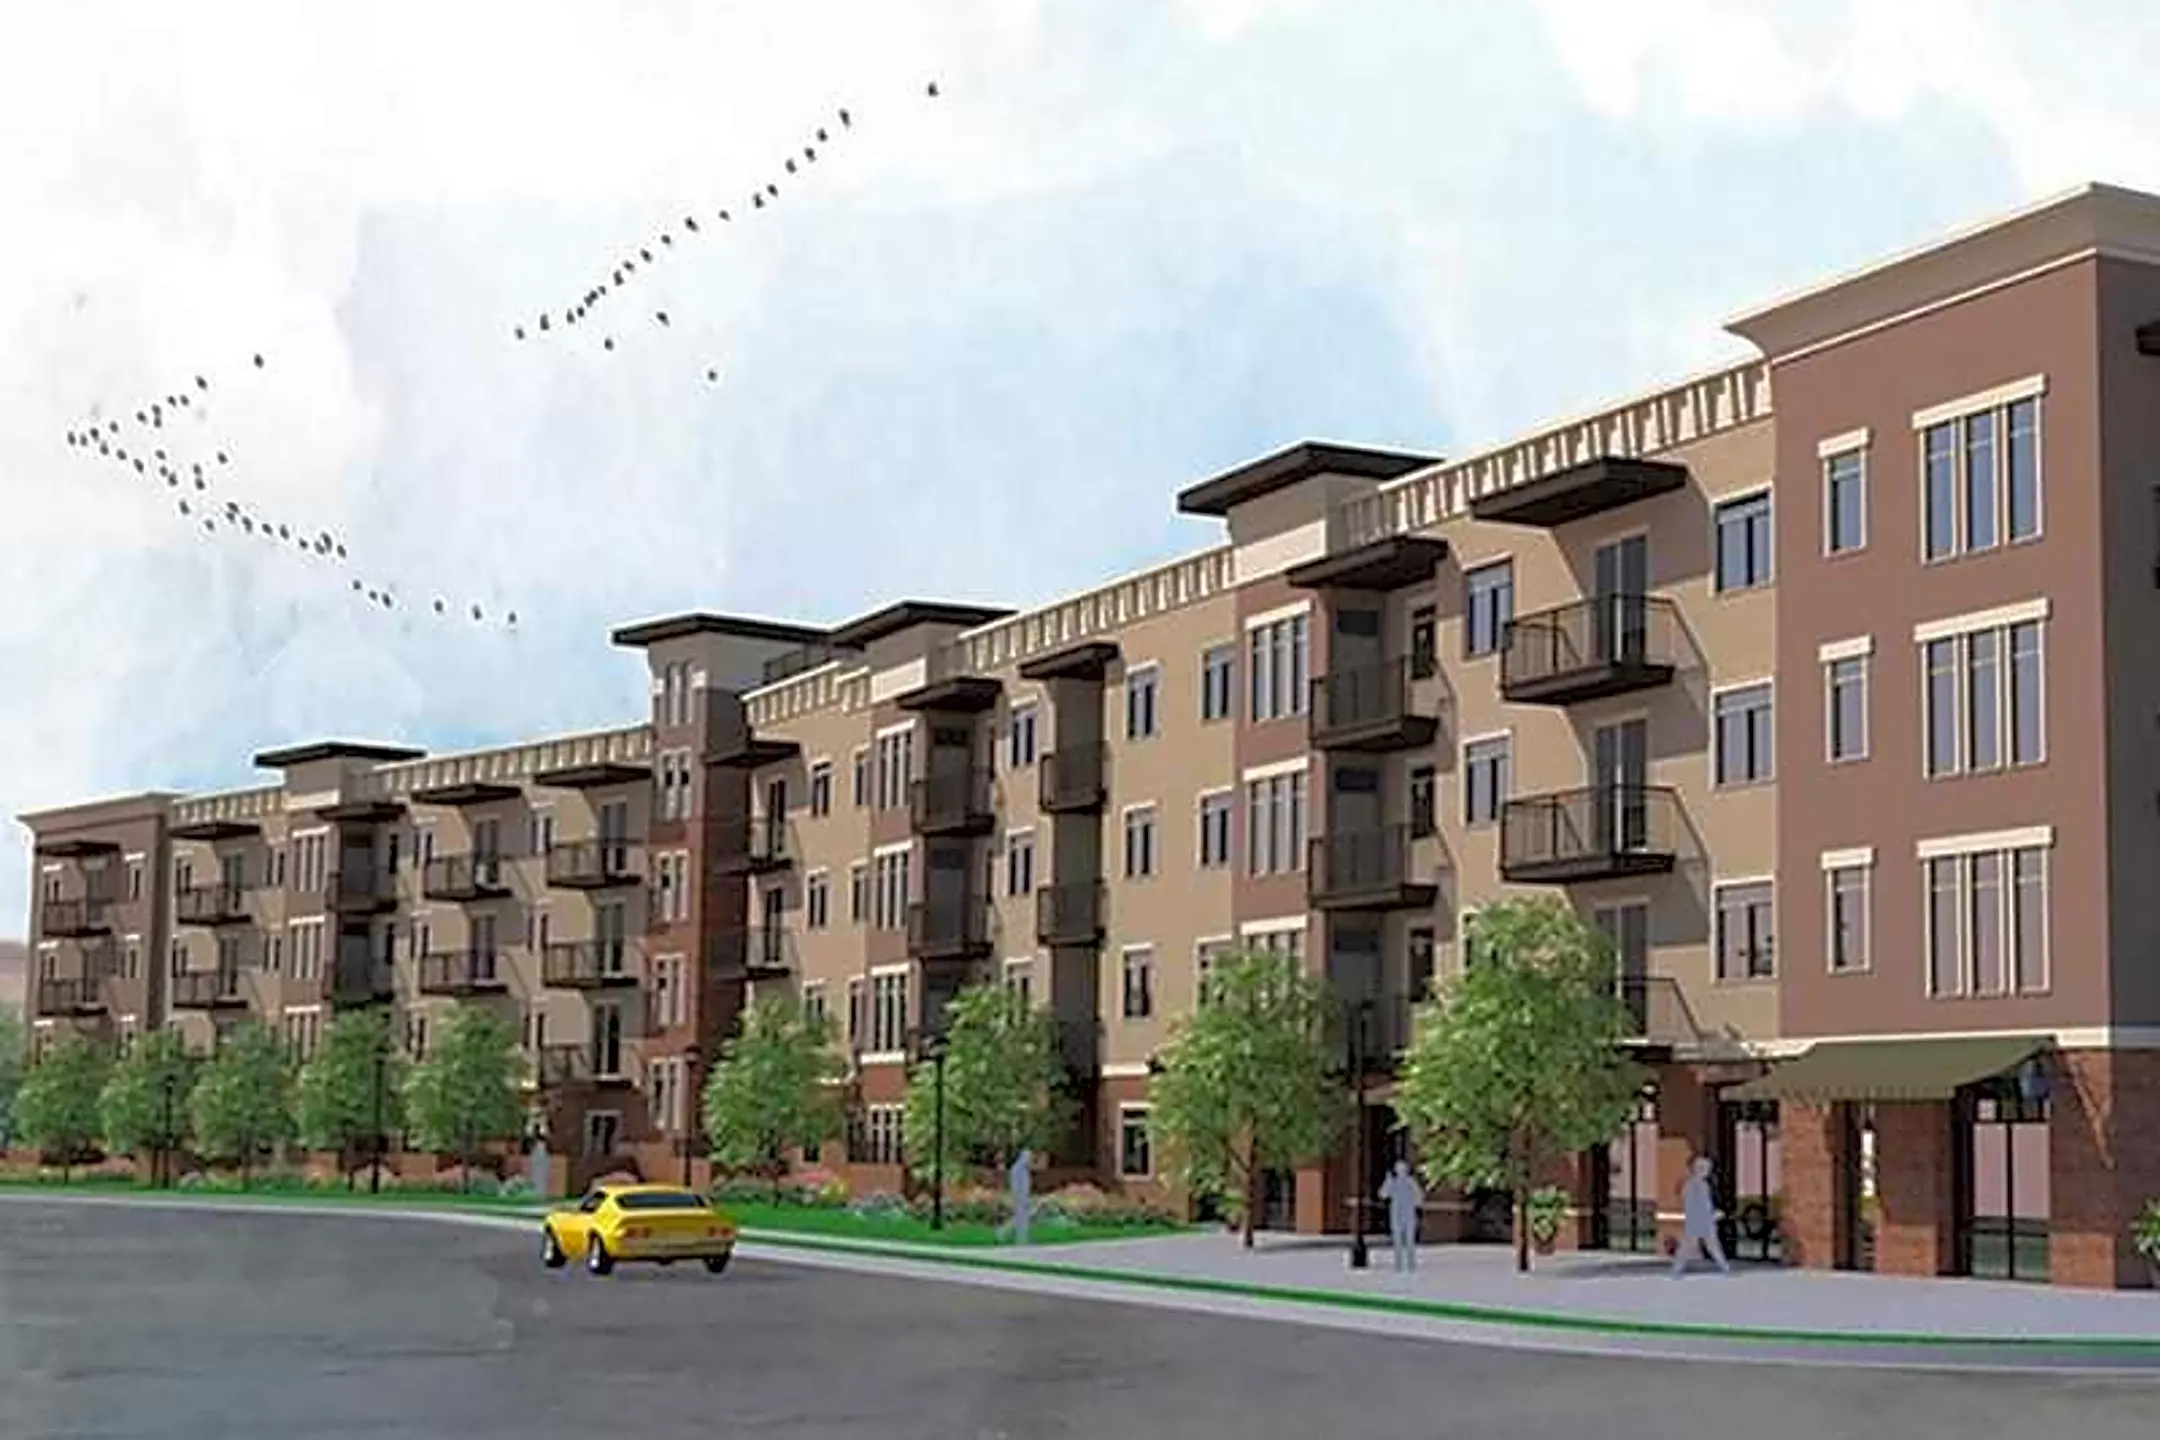 Rendering - City Centre Apartments - Clearfield, UT